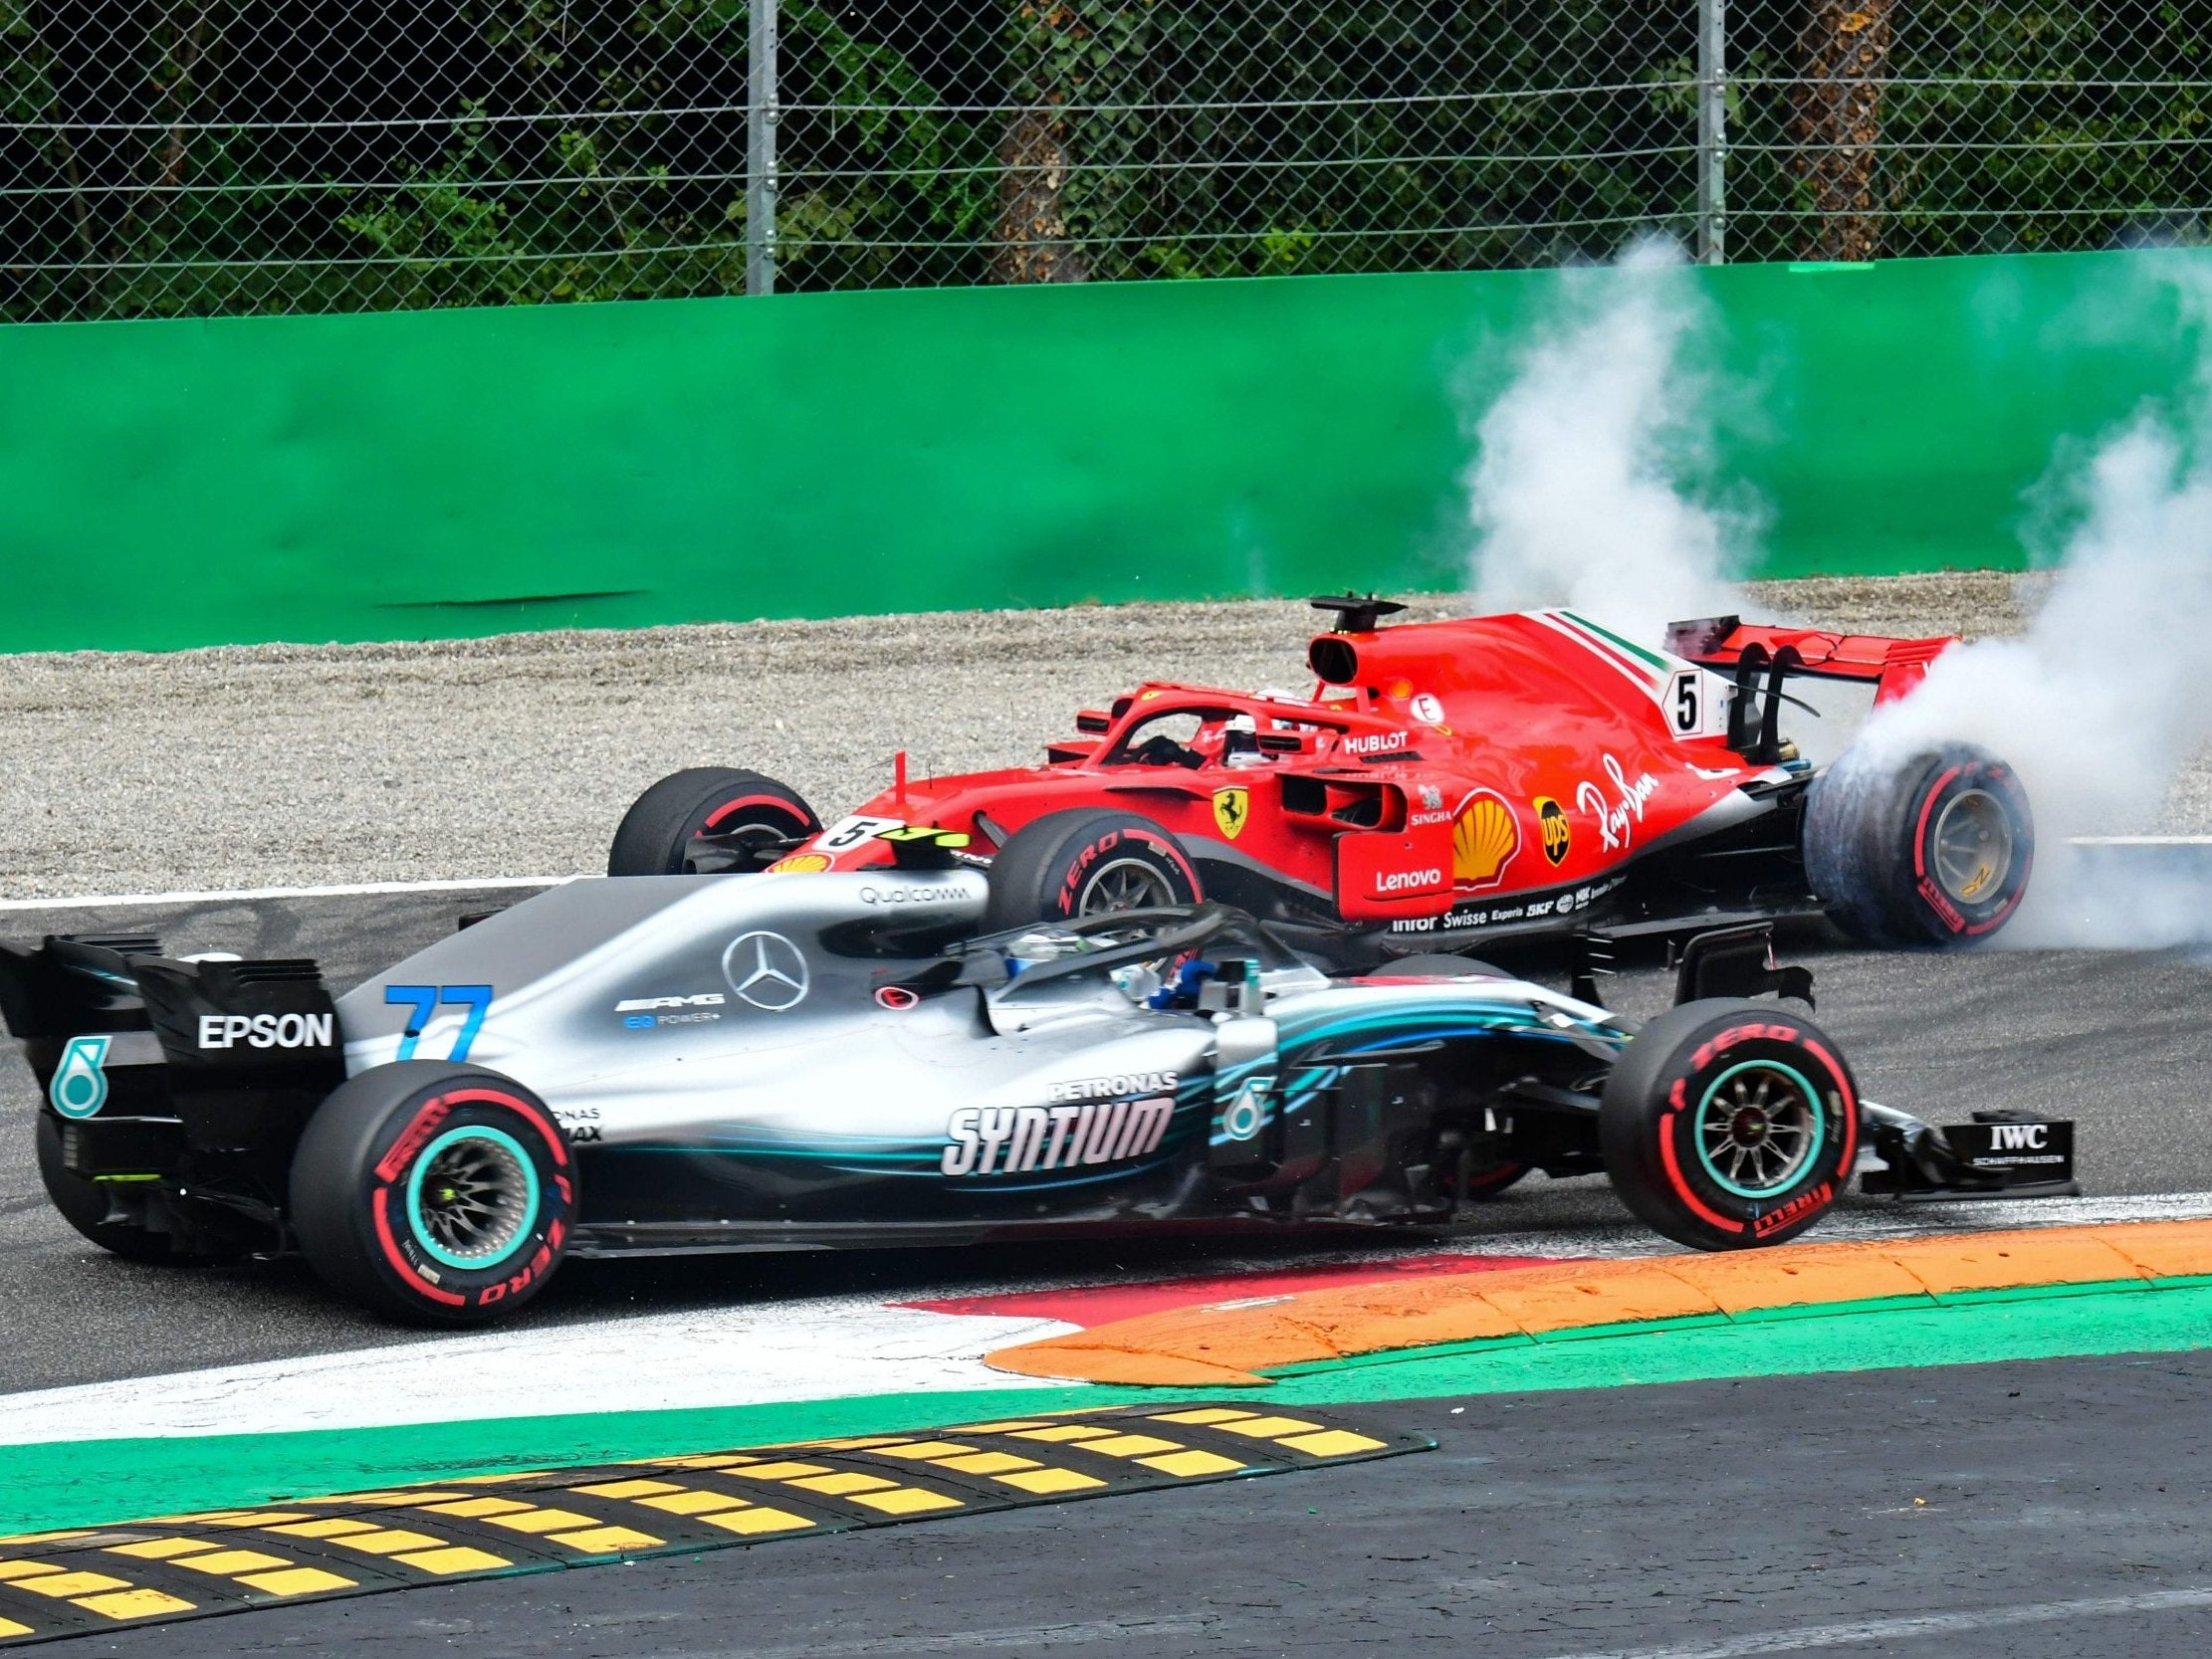 The pair collided on the first lap of the Italian Grand Prix